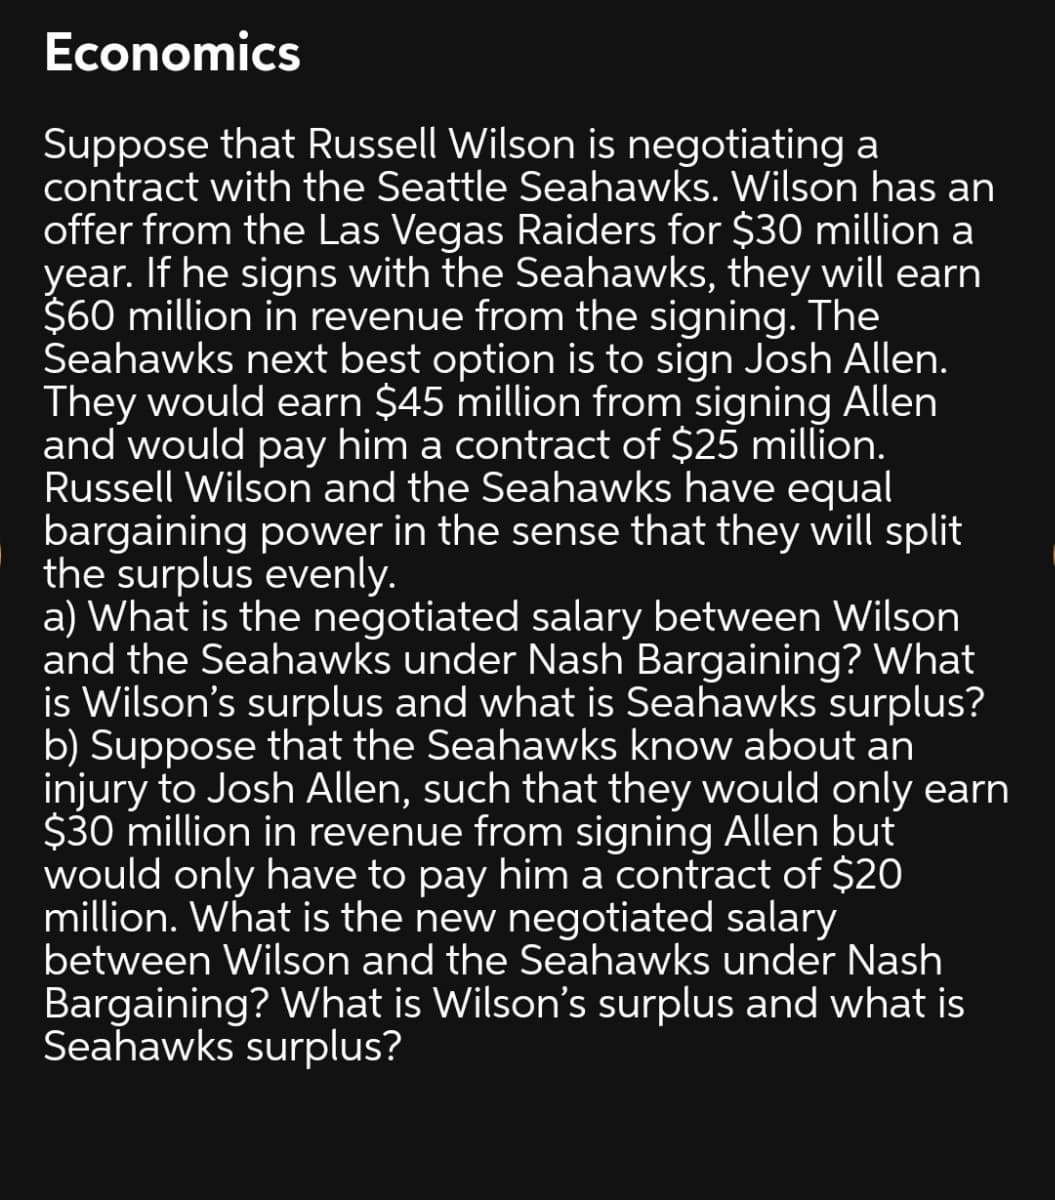 Economics
Suppose that Russell Wilson is negotiating a
contract with the Seattle Seahawks. Wilson has an
offer from the Las Vegas Raiders for $30 million a
year. If he signs with the Seahawks, they will earn
$60 million in revenue from the signing. The
Seahawks next best option is to sign Josh Allen.
They would earn $45 million from signing Allen
and would pay him a contract of $25 million.
Russell Wilson and the Seahawks have equal
bargaining power in the sense that they will split
the surplus evenly.
a) What is the negotiated salary between Wilson
and the Seahawks under Nash Bargaining? What
is Wilson's surplus and what is Seahawks surplus?
b) Suppose that the Seahawks know about an
injury to Josh Allen, such that they would only earn
$30 million in revenue from signing Allen but
would only have to pay him a contract of $20
million. What is the new negotiated salary
between Wilson and the Seahawks under Nash
Bargaining? What is Wilson's surplus and what is
Seahawks surplus?
